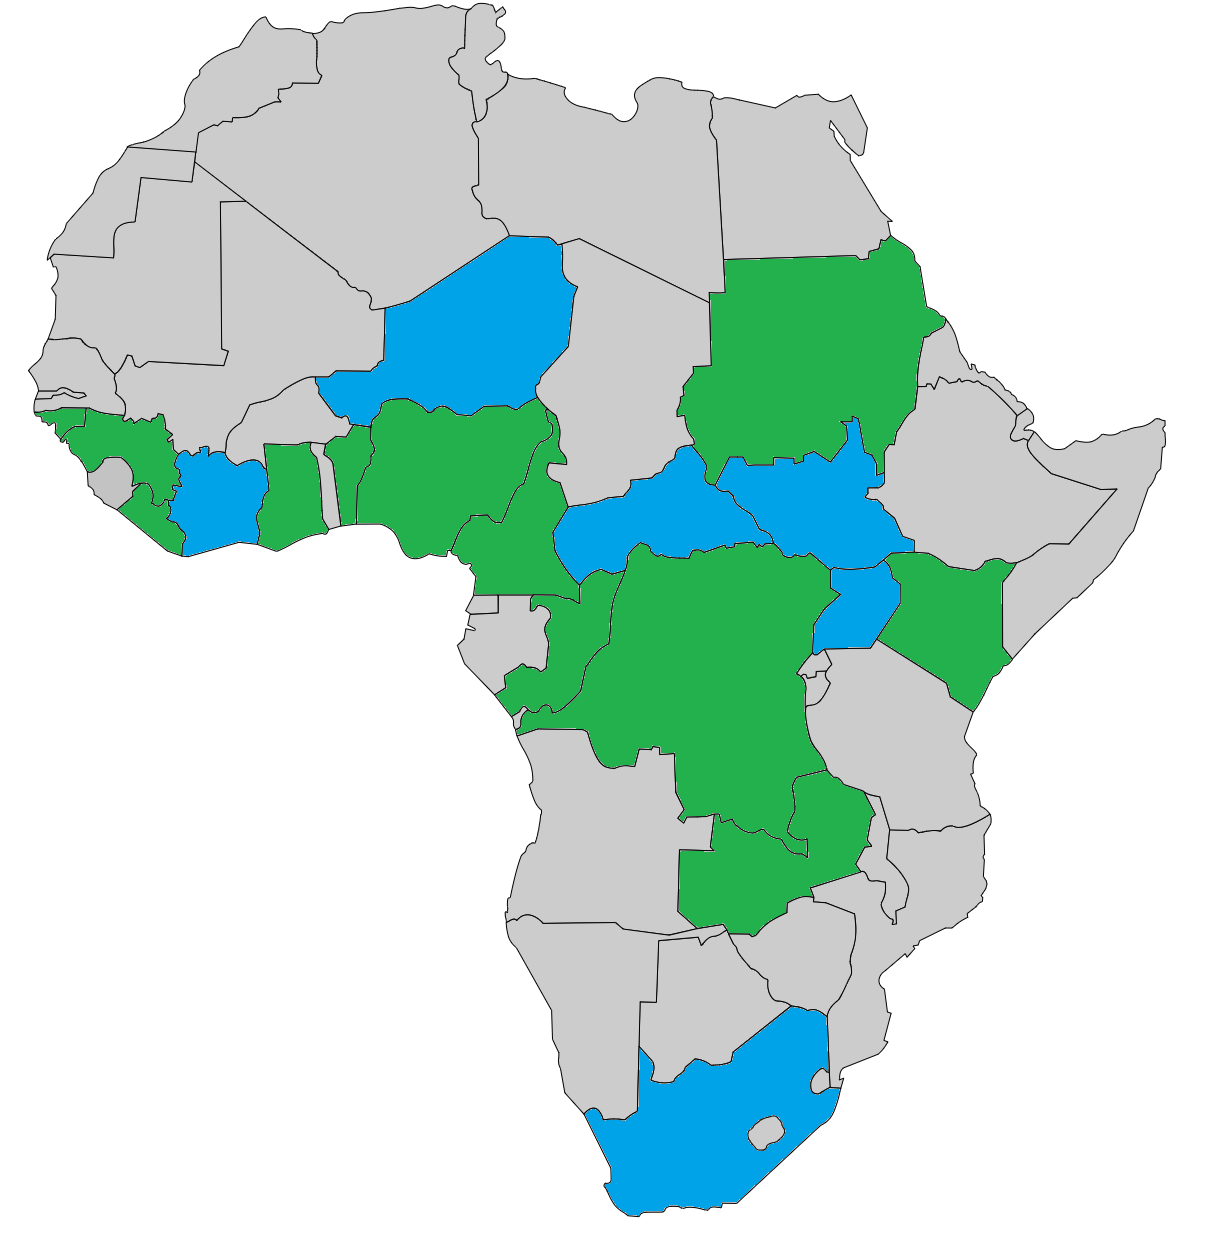 Africa coverage